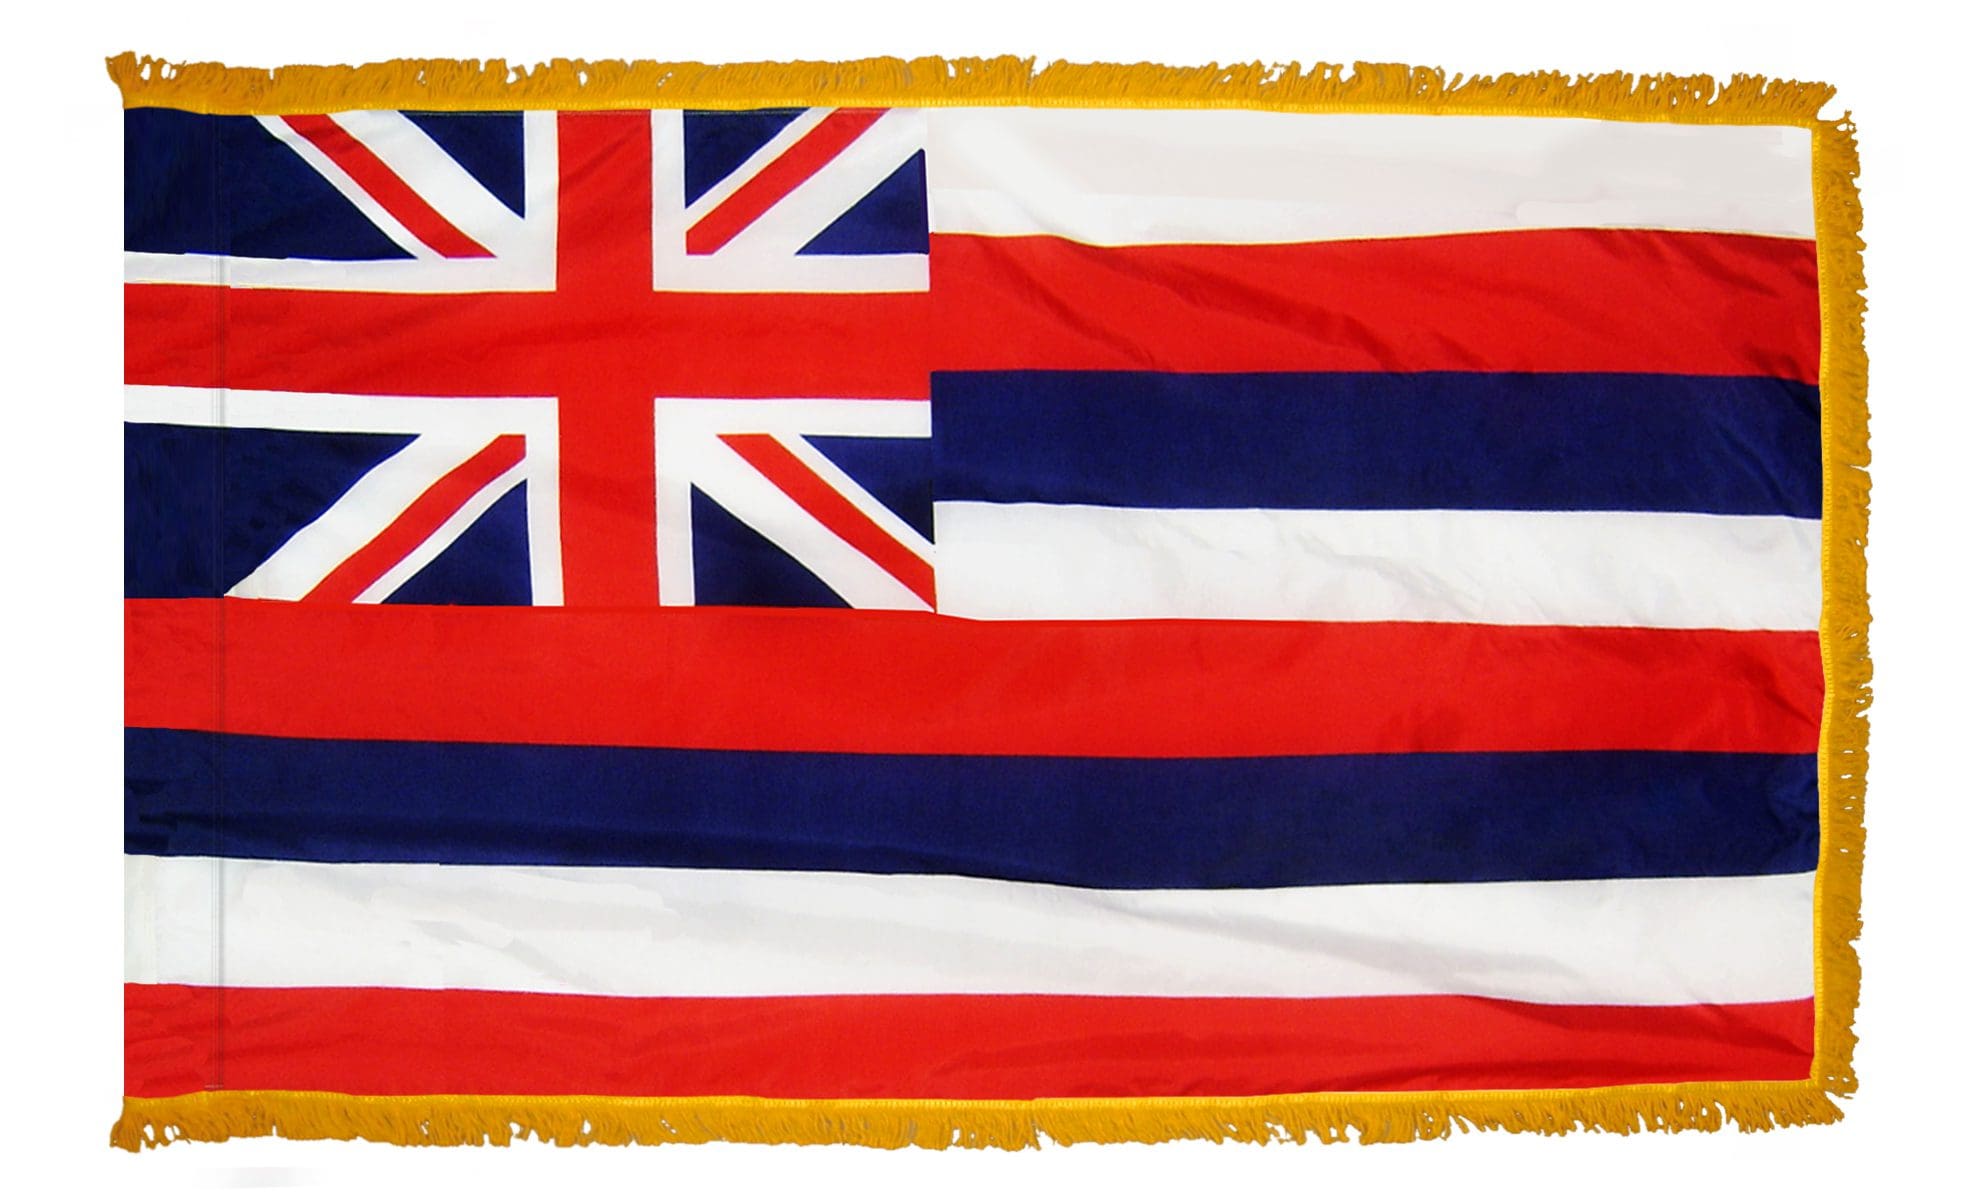 Hawaii State Flag 3x5 or 4x6 ft. (fringed)